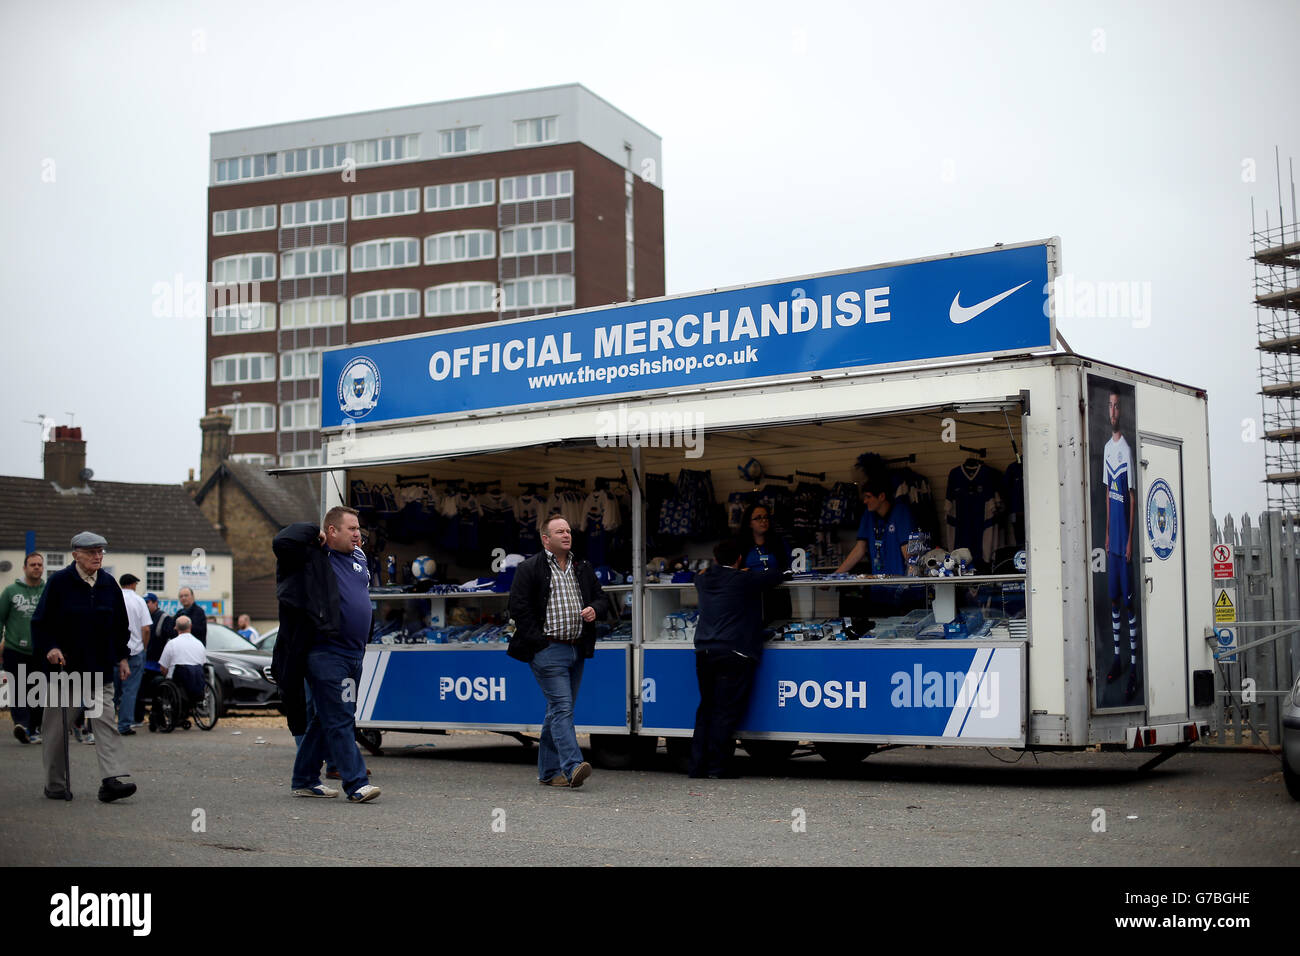 Fans arrive to buy merchandise before the Sky Bet League One match at London Road, Peterborough. PRESS ASSOCIATION Photo. Picture date: Saturday September 6, 2014. See PA Story SOCCER Peterborough. Photo credit should read: Stephen Pond/PA Wire. Stock Photo